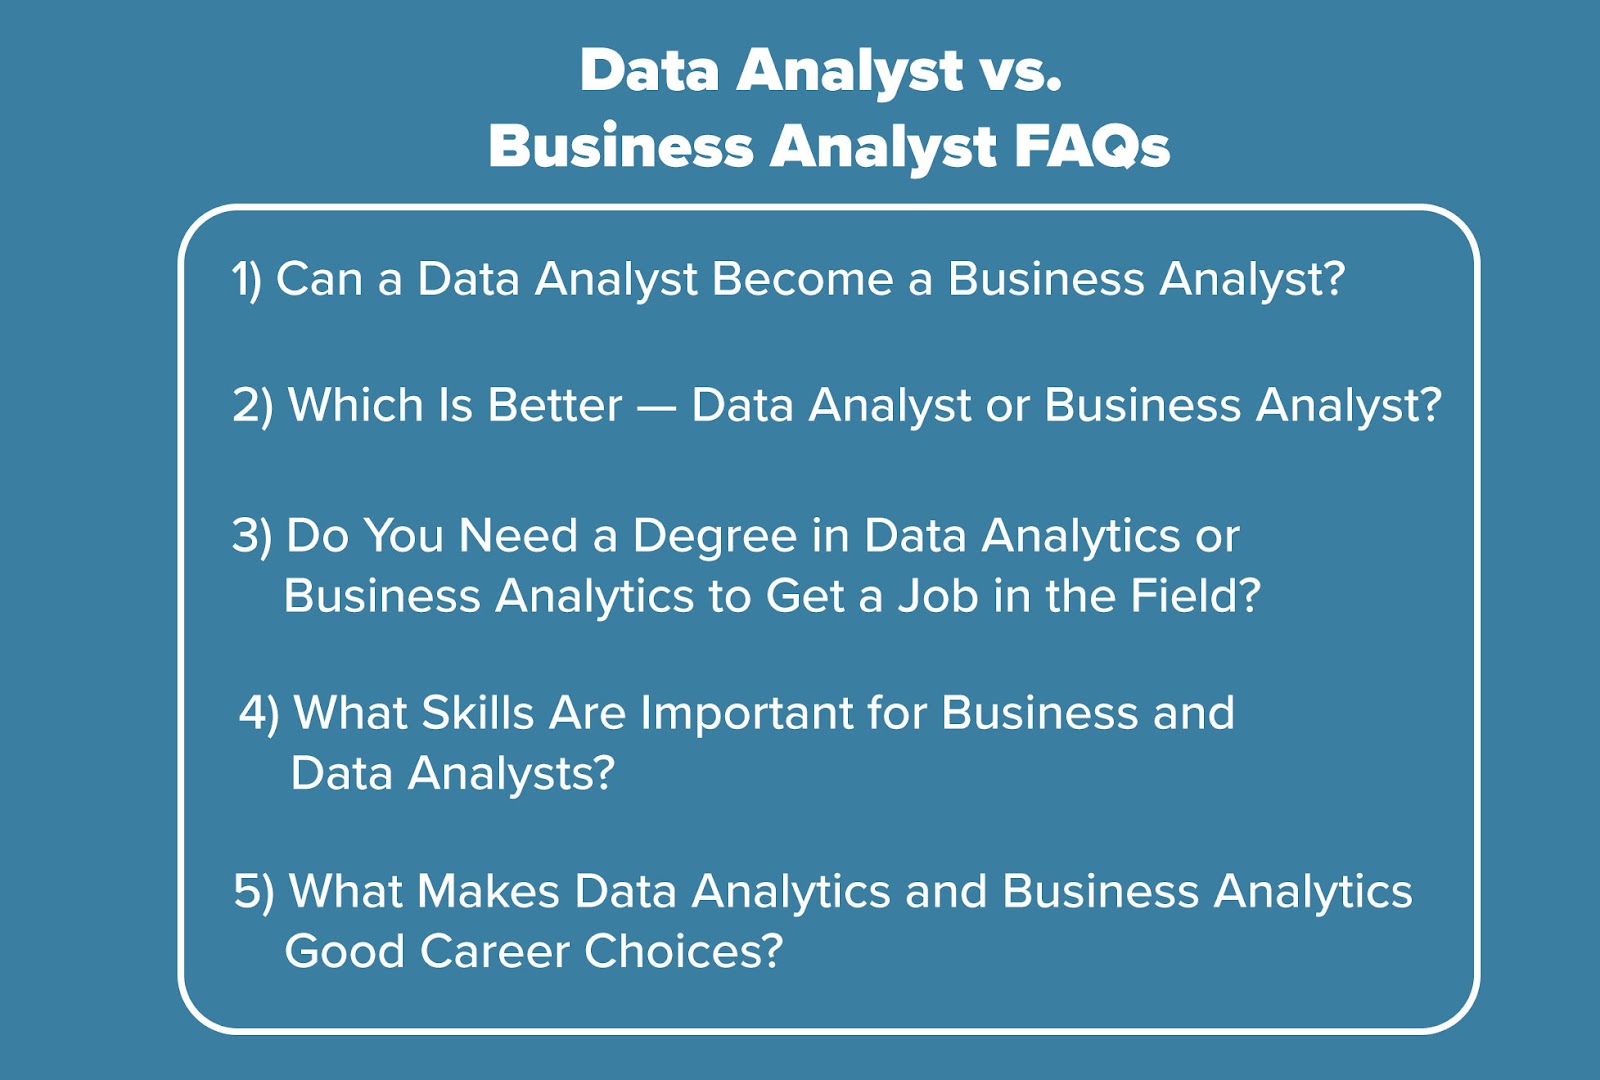 An image listing out the FAQs many people have about business analysts and data analysts.